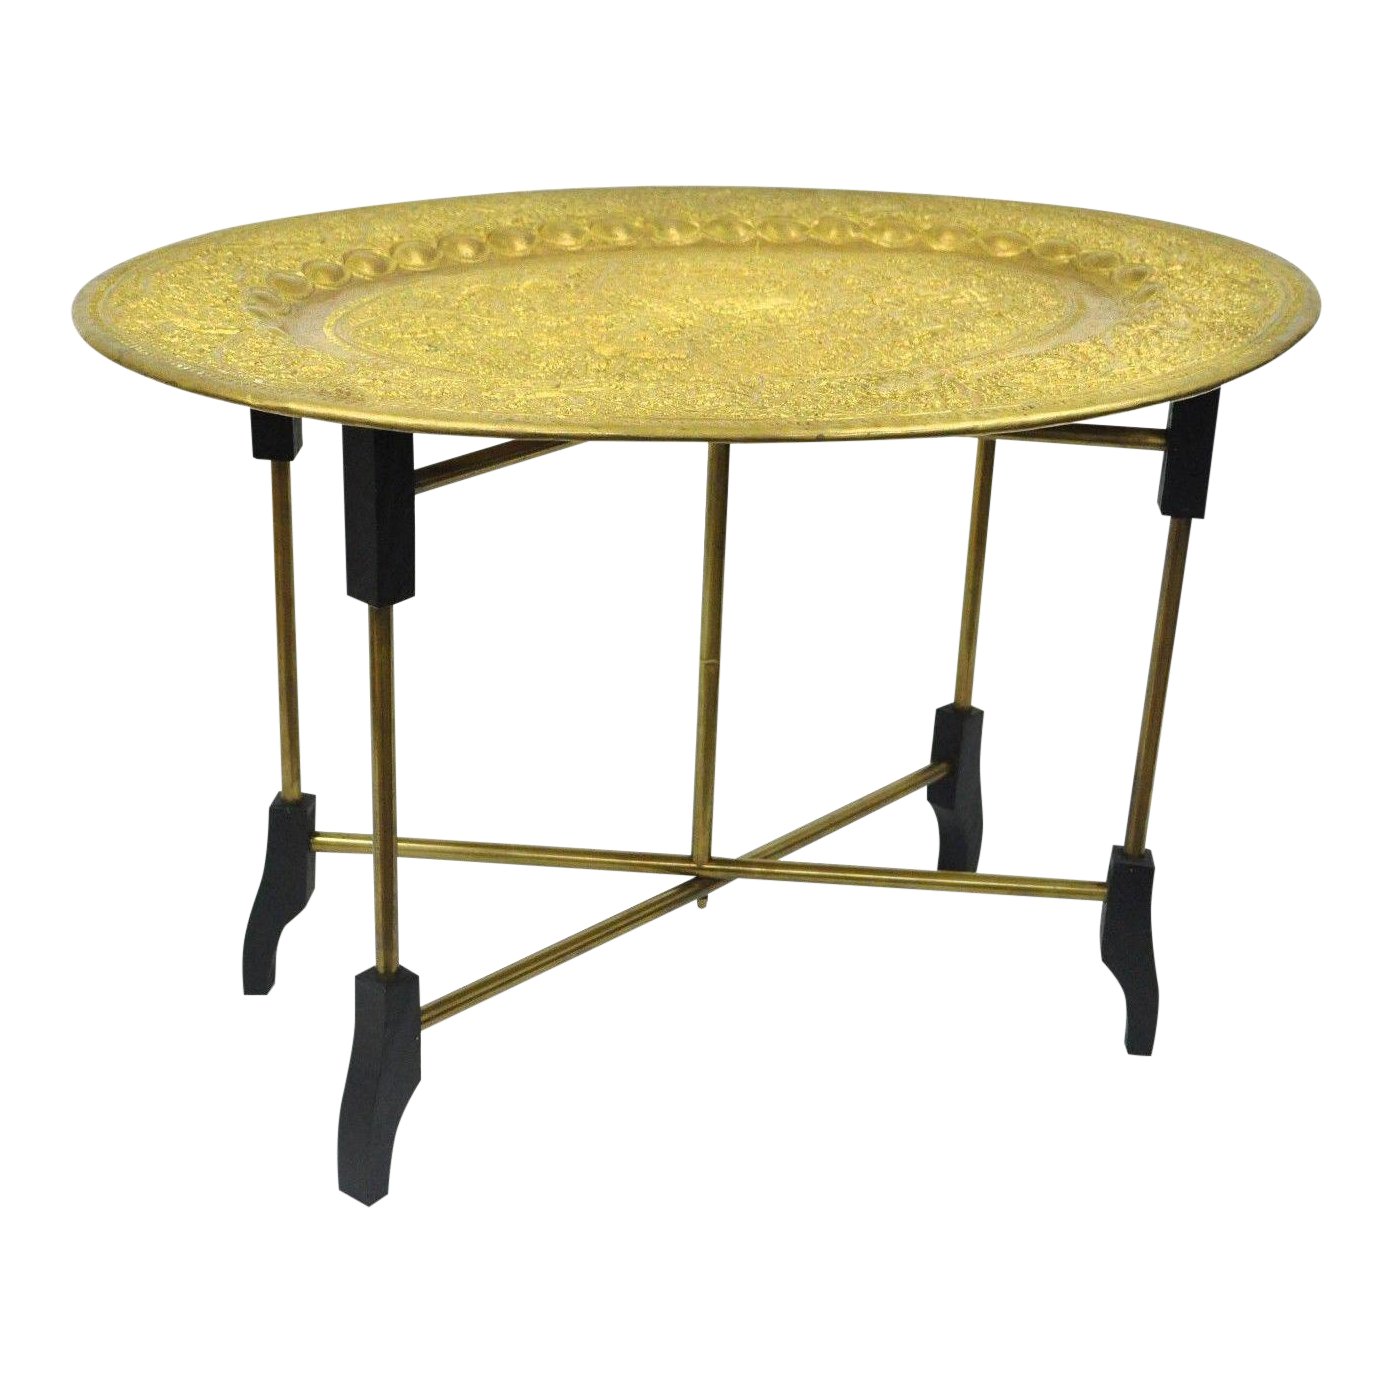 vintage mid century moroccan brass tray top folding small coffee accent table chairish modular sofas for spaces swag lamp kmart kids pottery barn living room sets bedroom lights